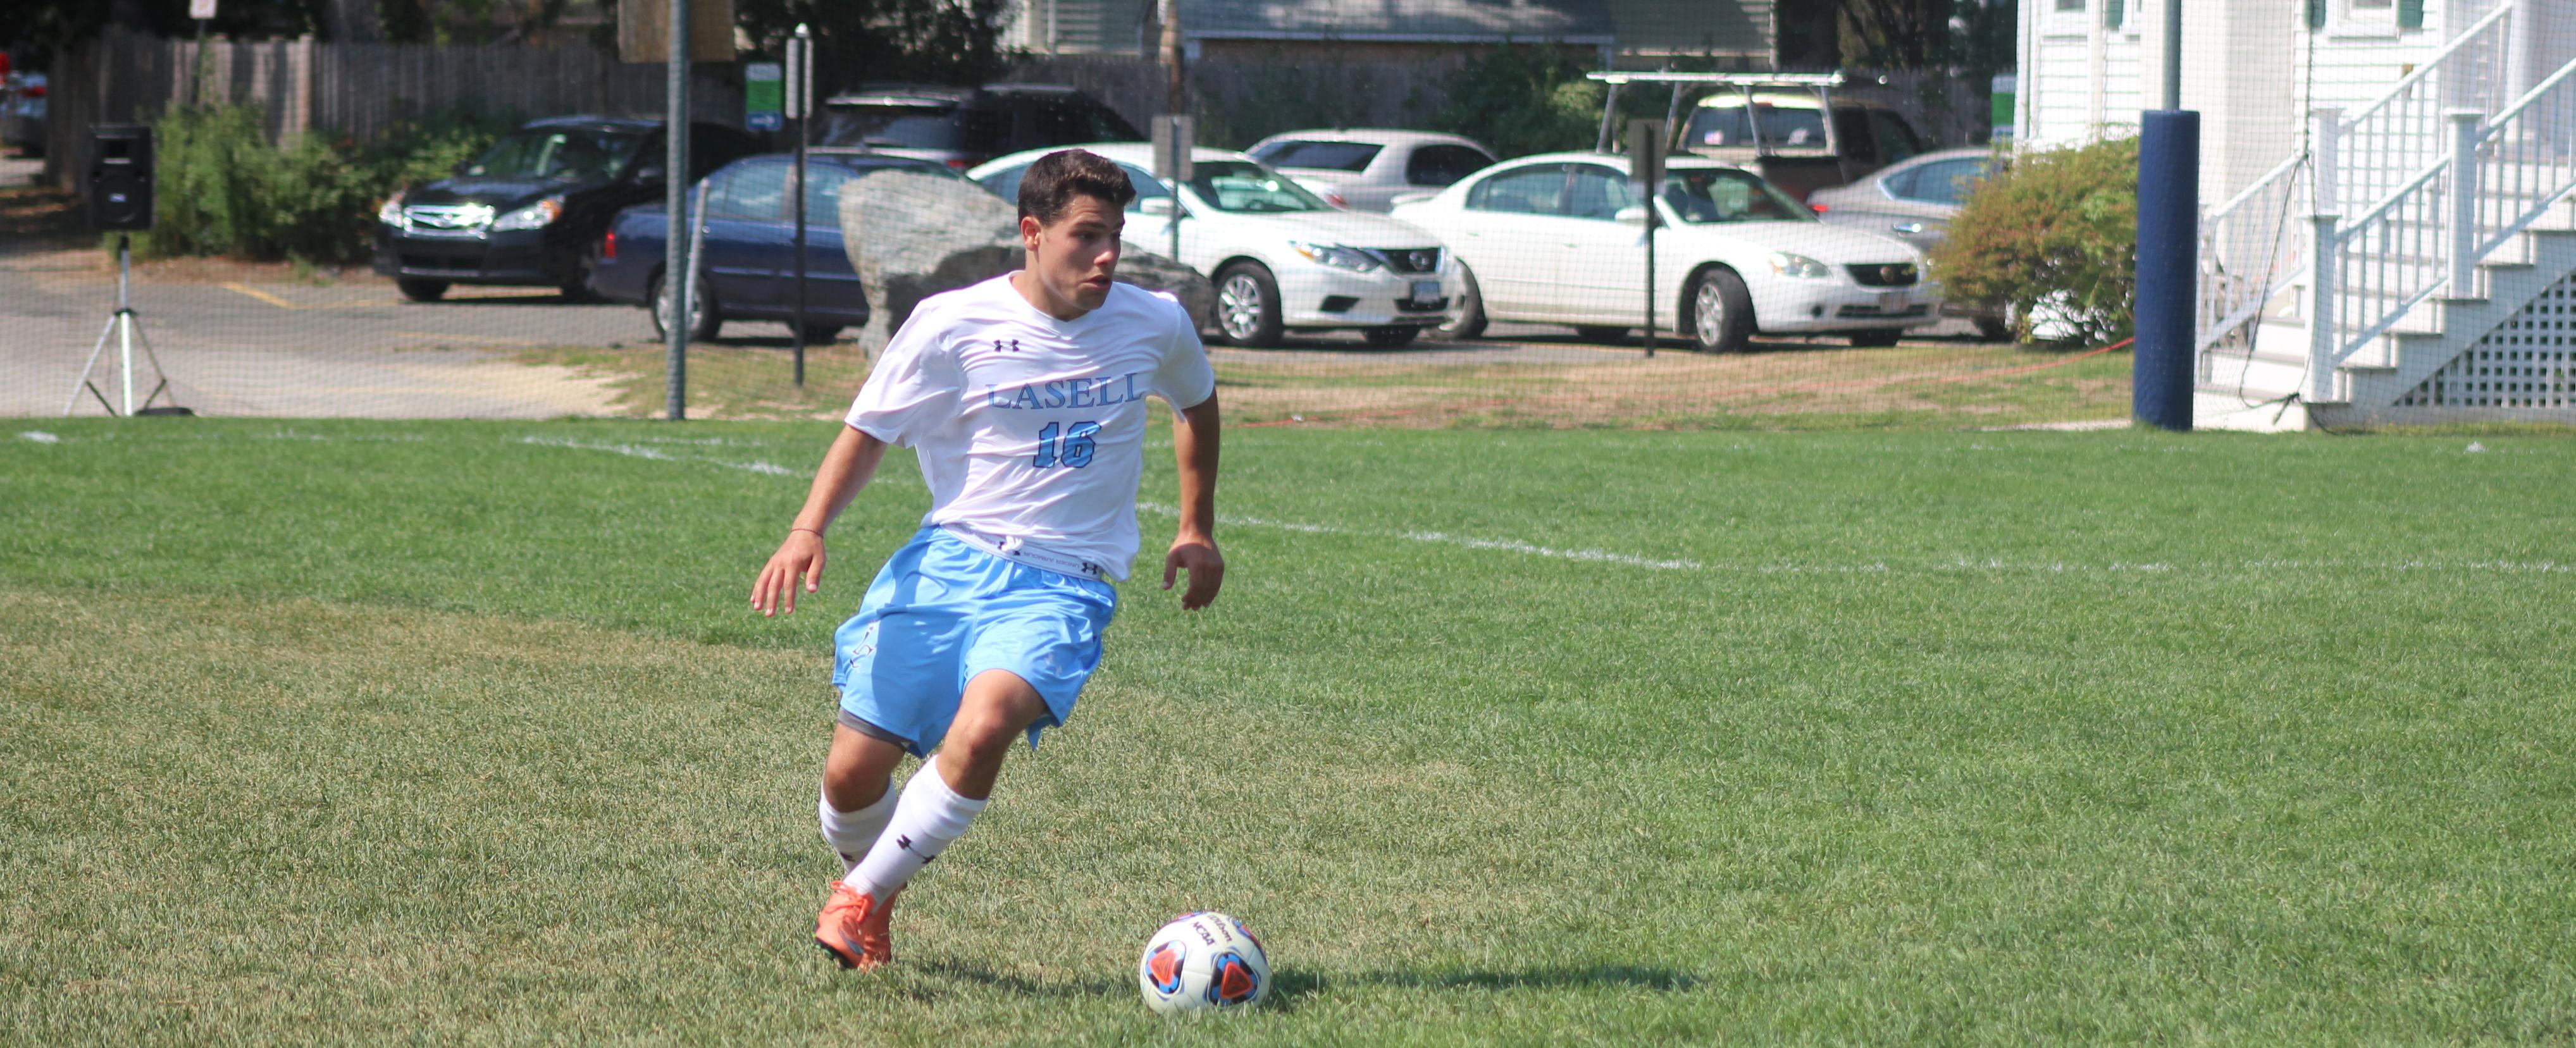 Wentworth Shuts Out Men's Soccer 2-0